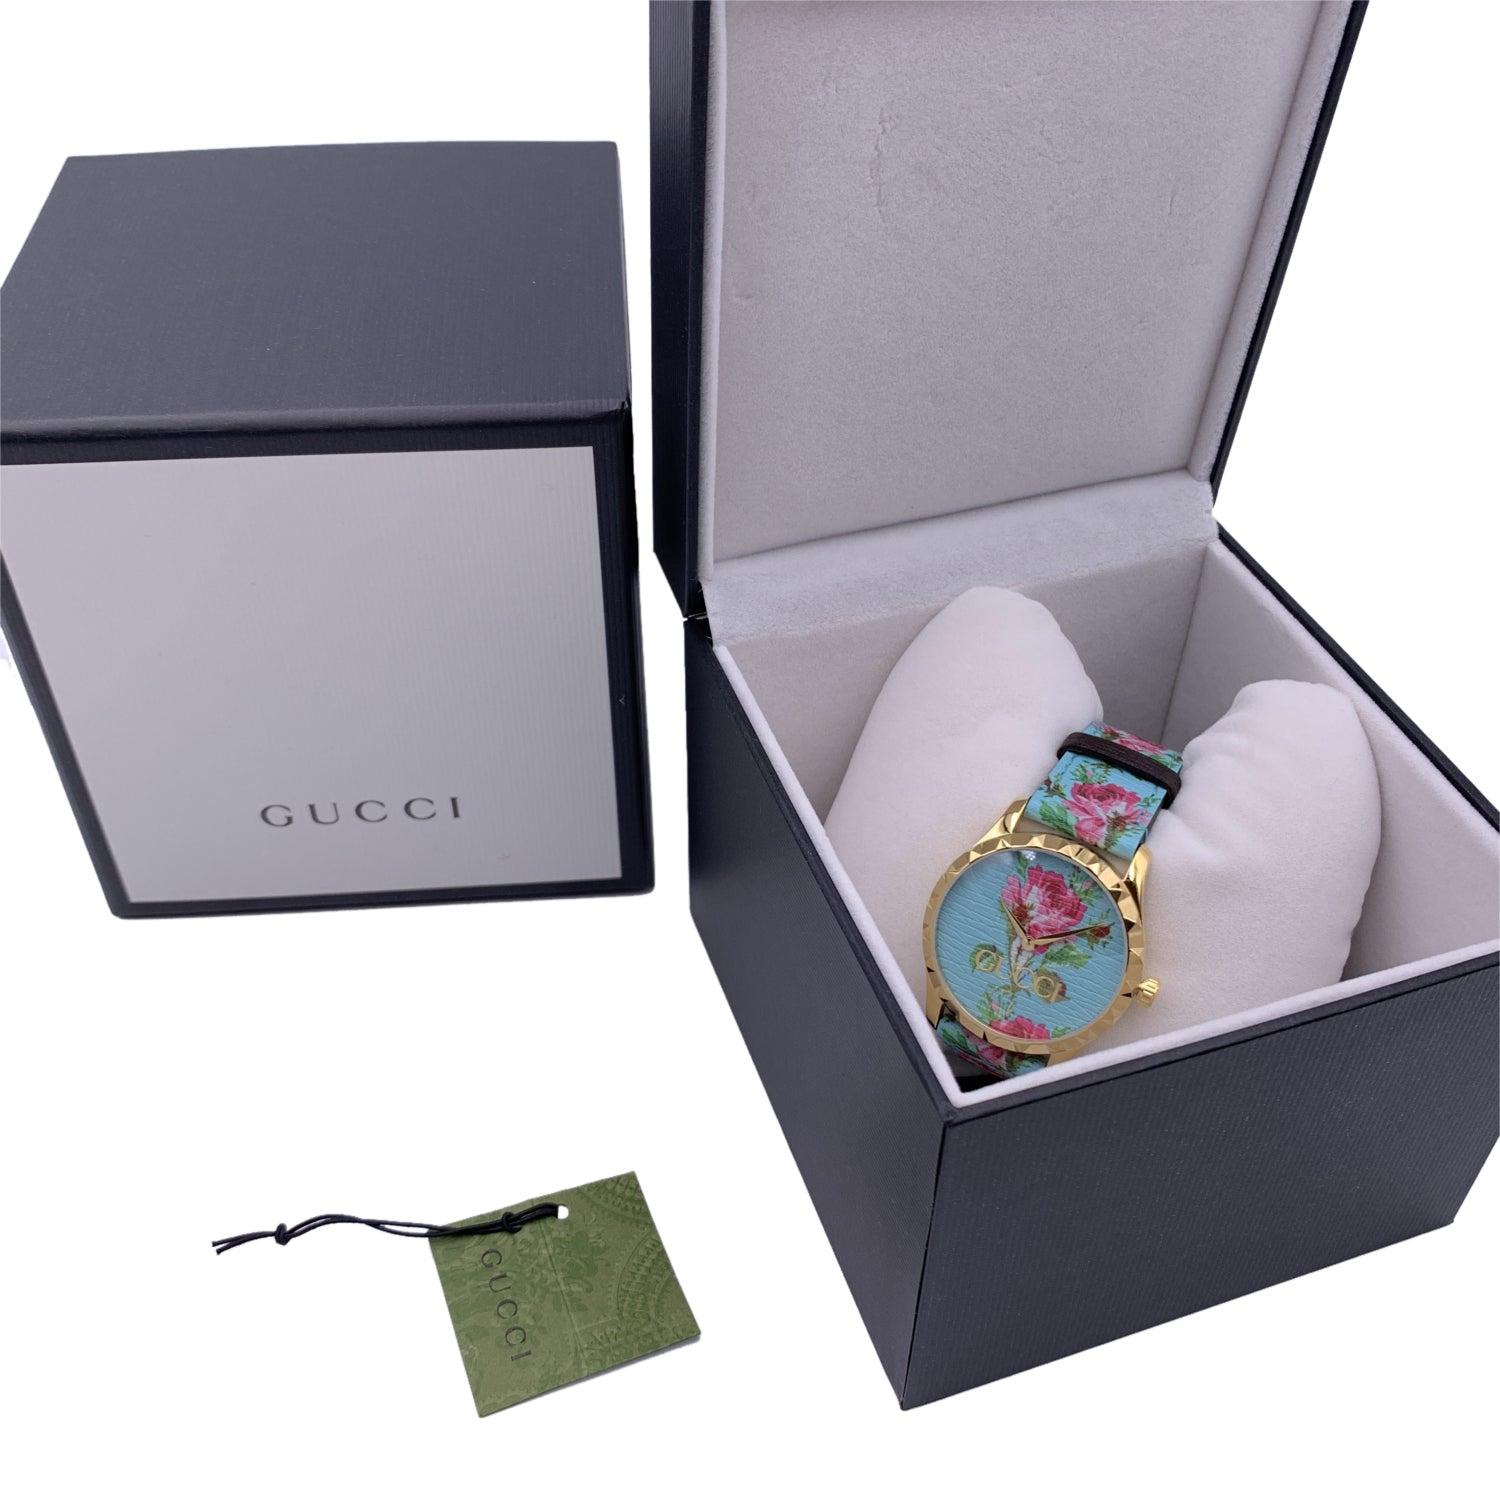 Gucci 'G-Timeless' gold metal stainless steel watch, Model 126.4. Round gold metal case (40 mm - crown included) with floral print leather strap. Aqua floral printed dial with gold metal GUCCI signature on the face. Two hands. Sapphire crystal.